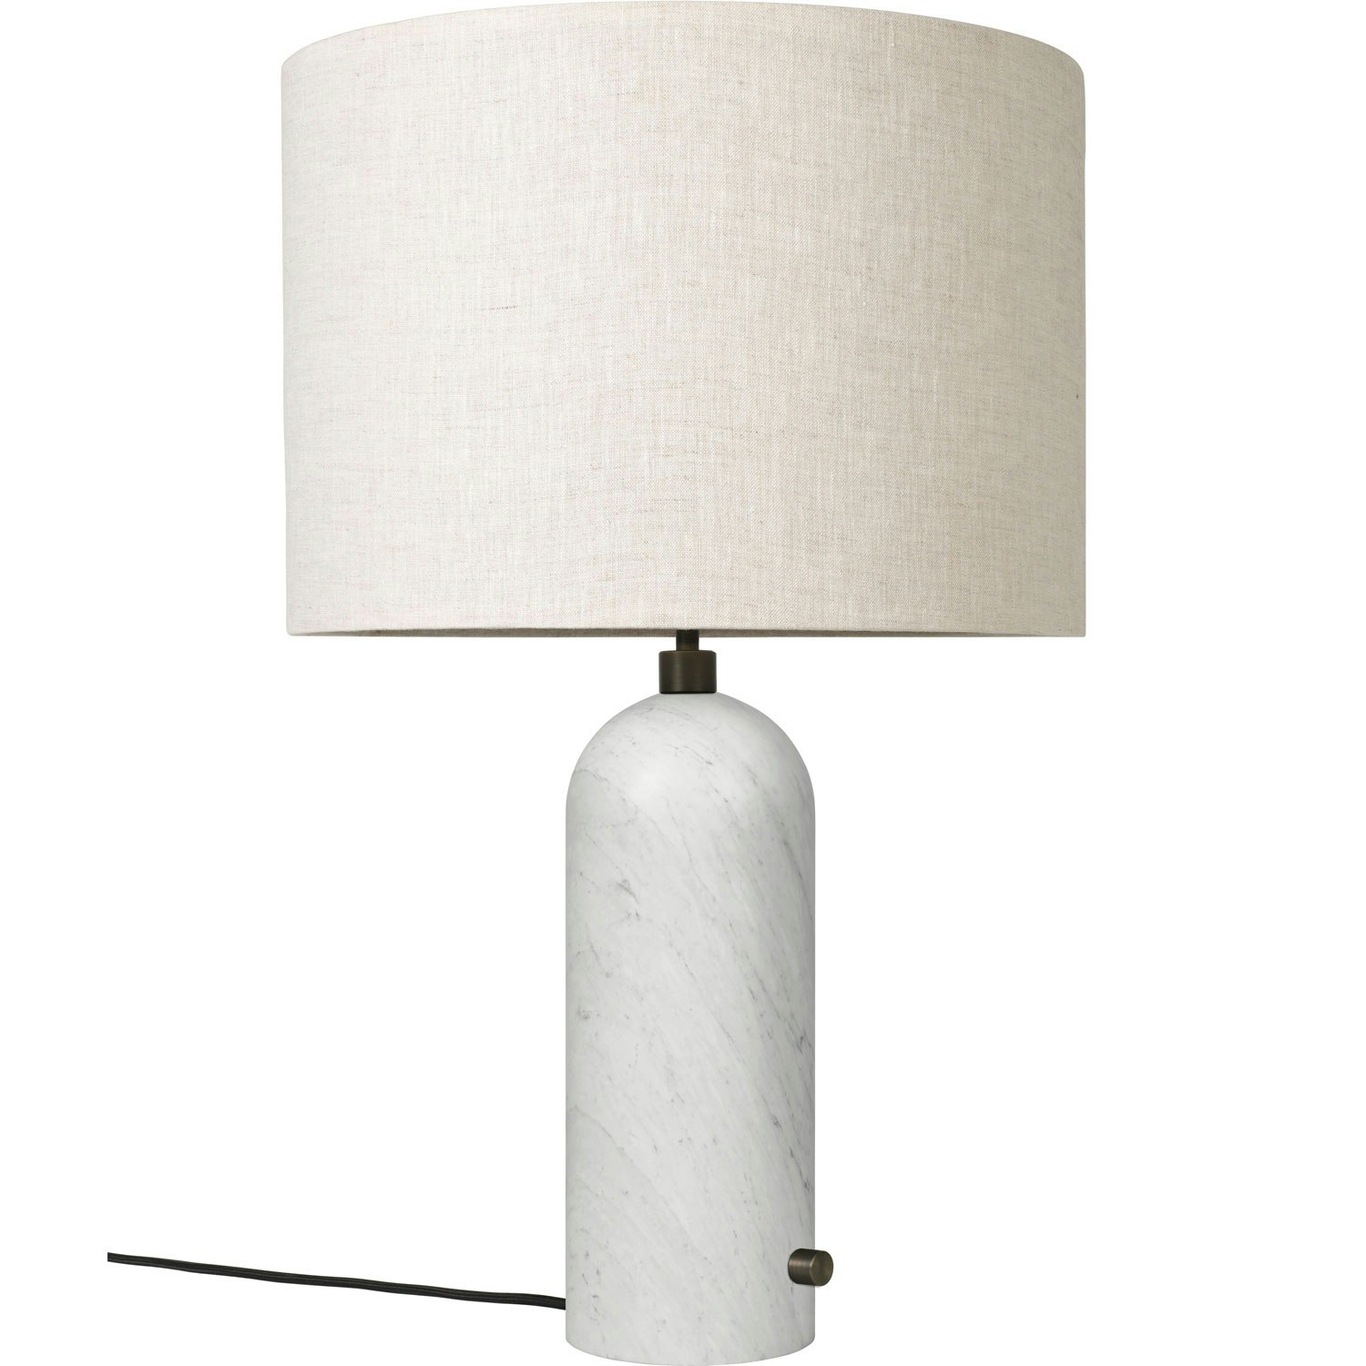 Gravity Table Lamp Large, White Marble / Canvas